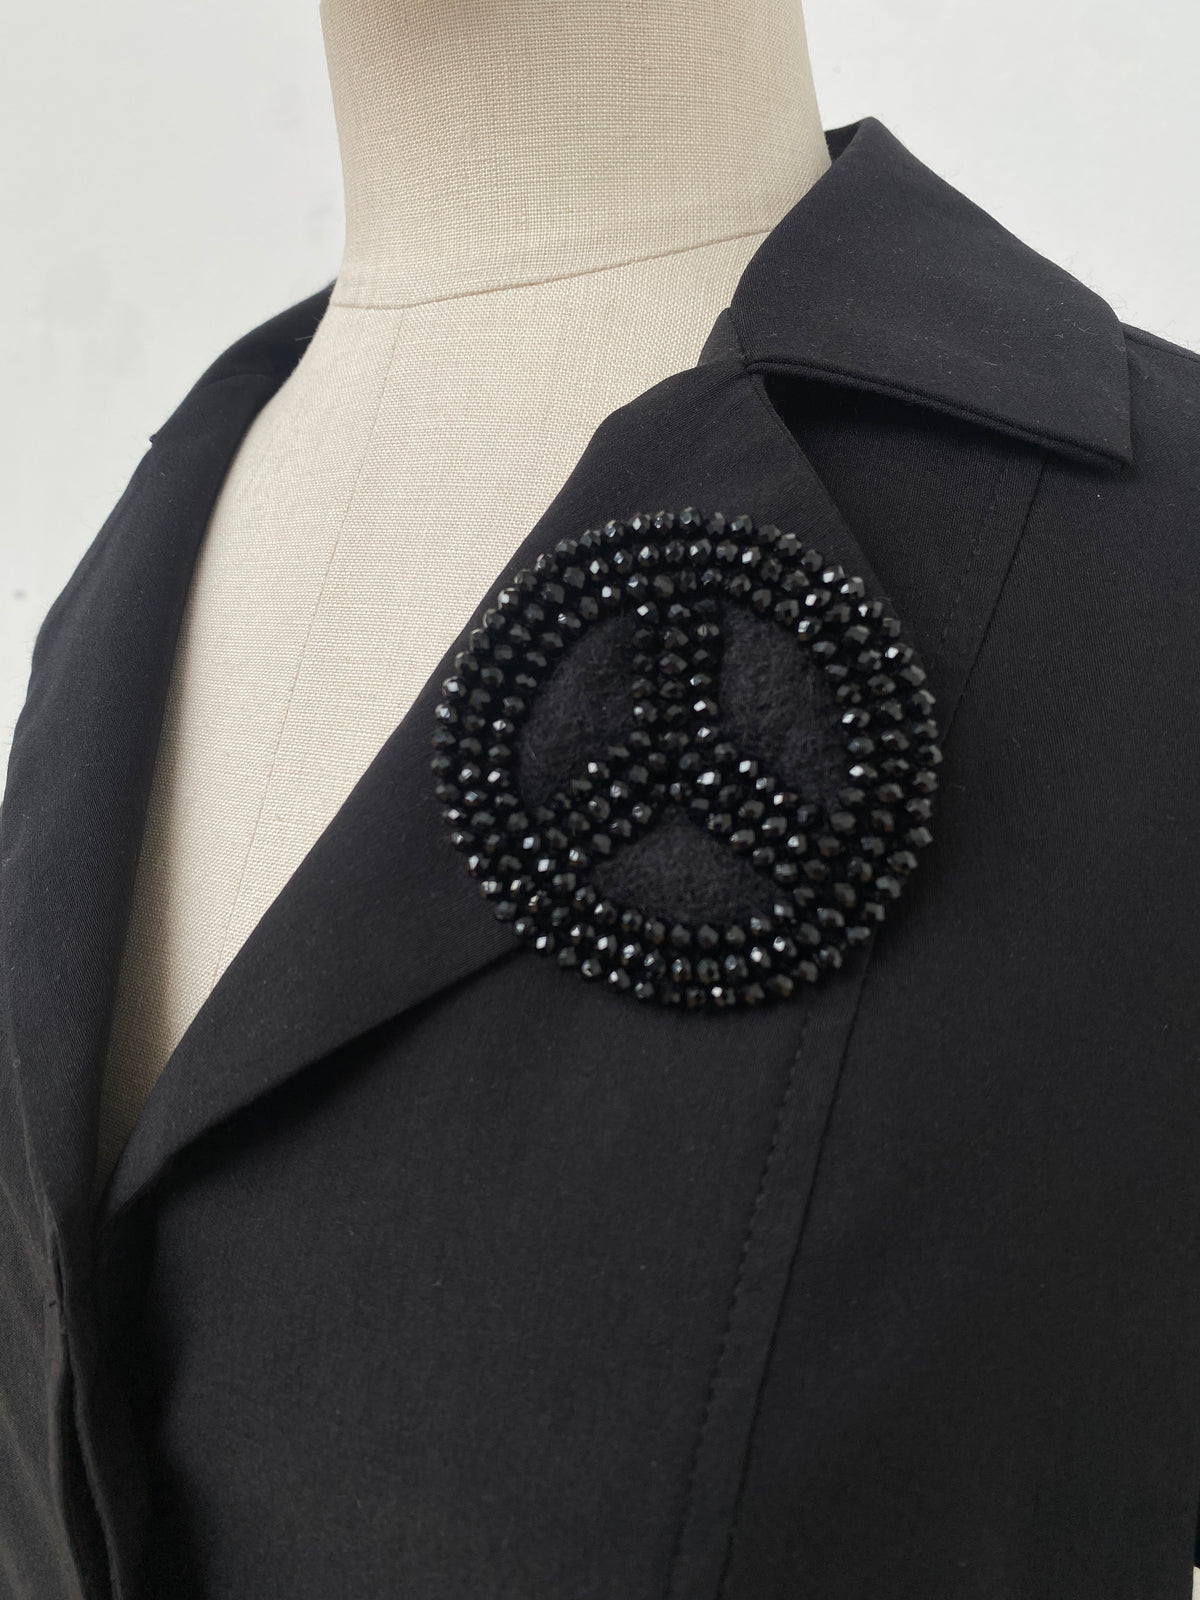 0009 - Couture Peace in Black